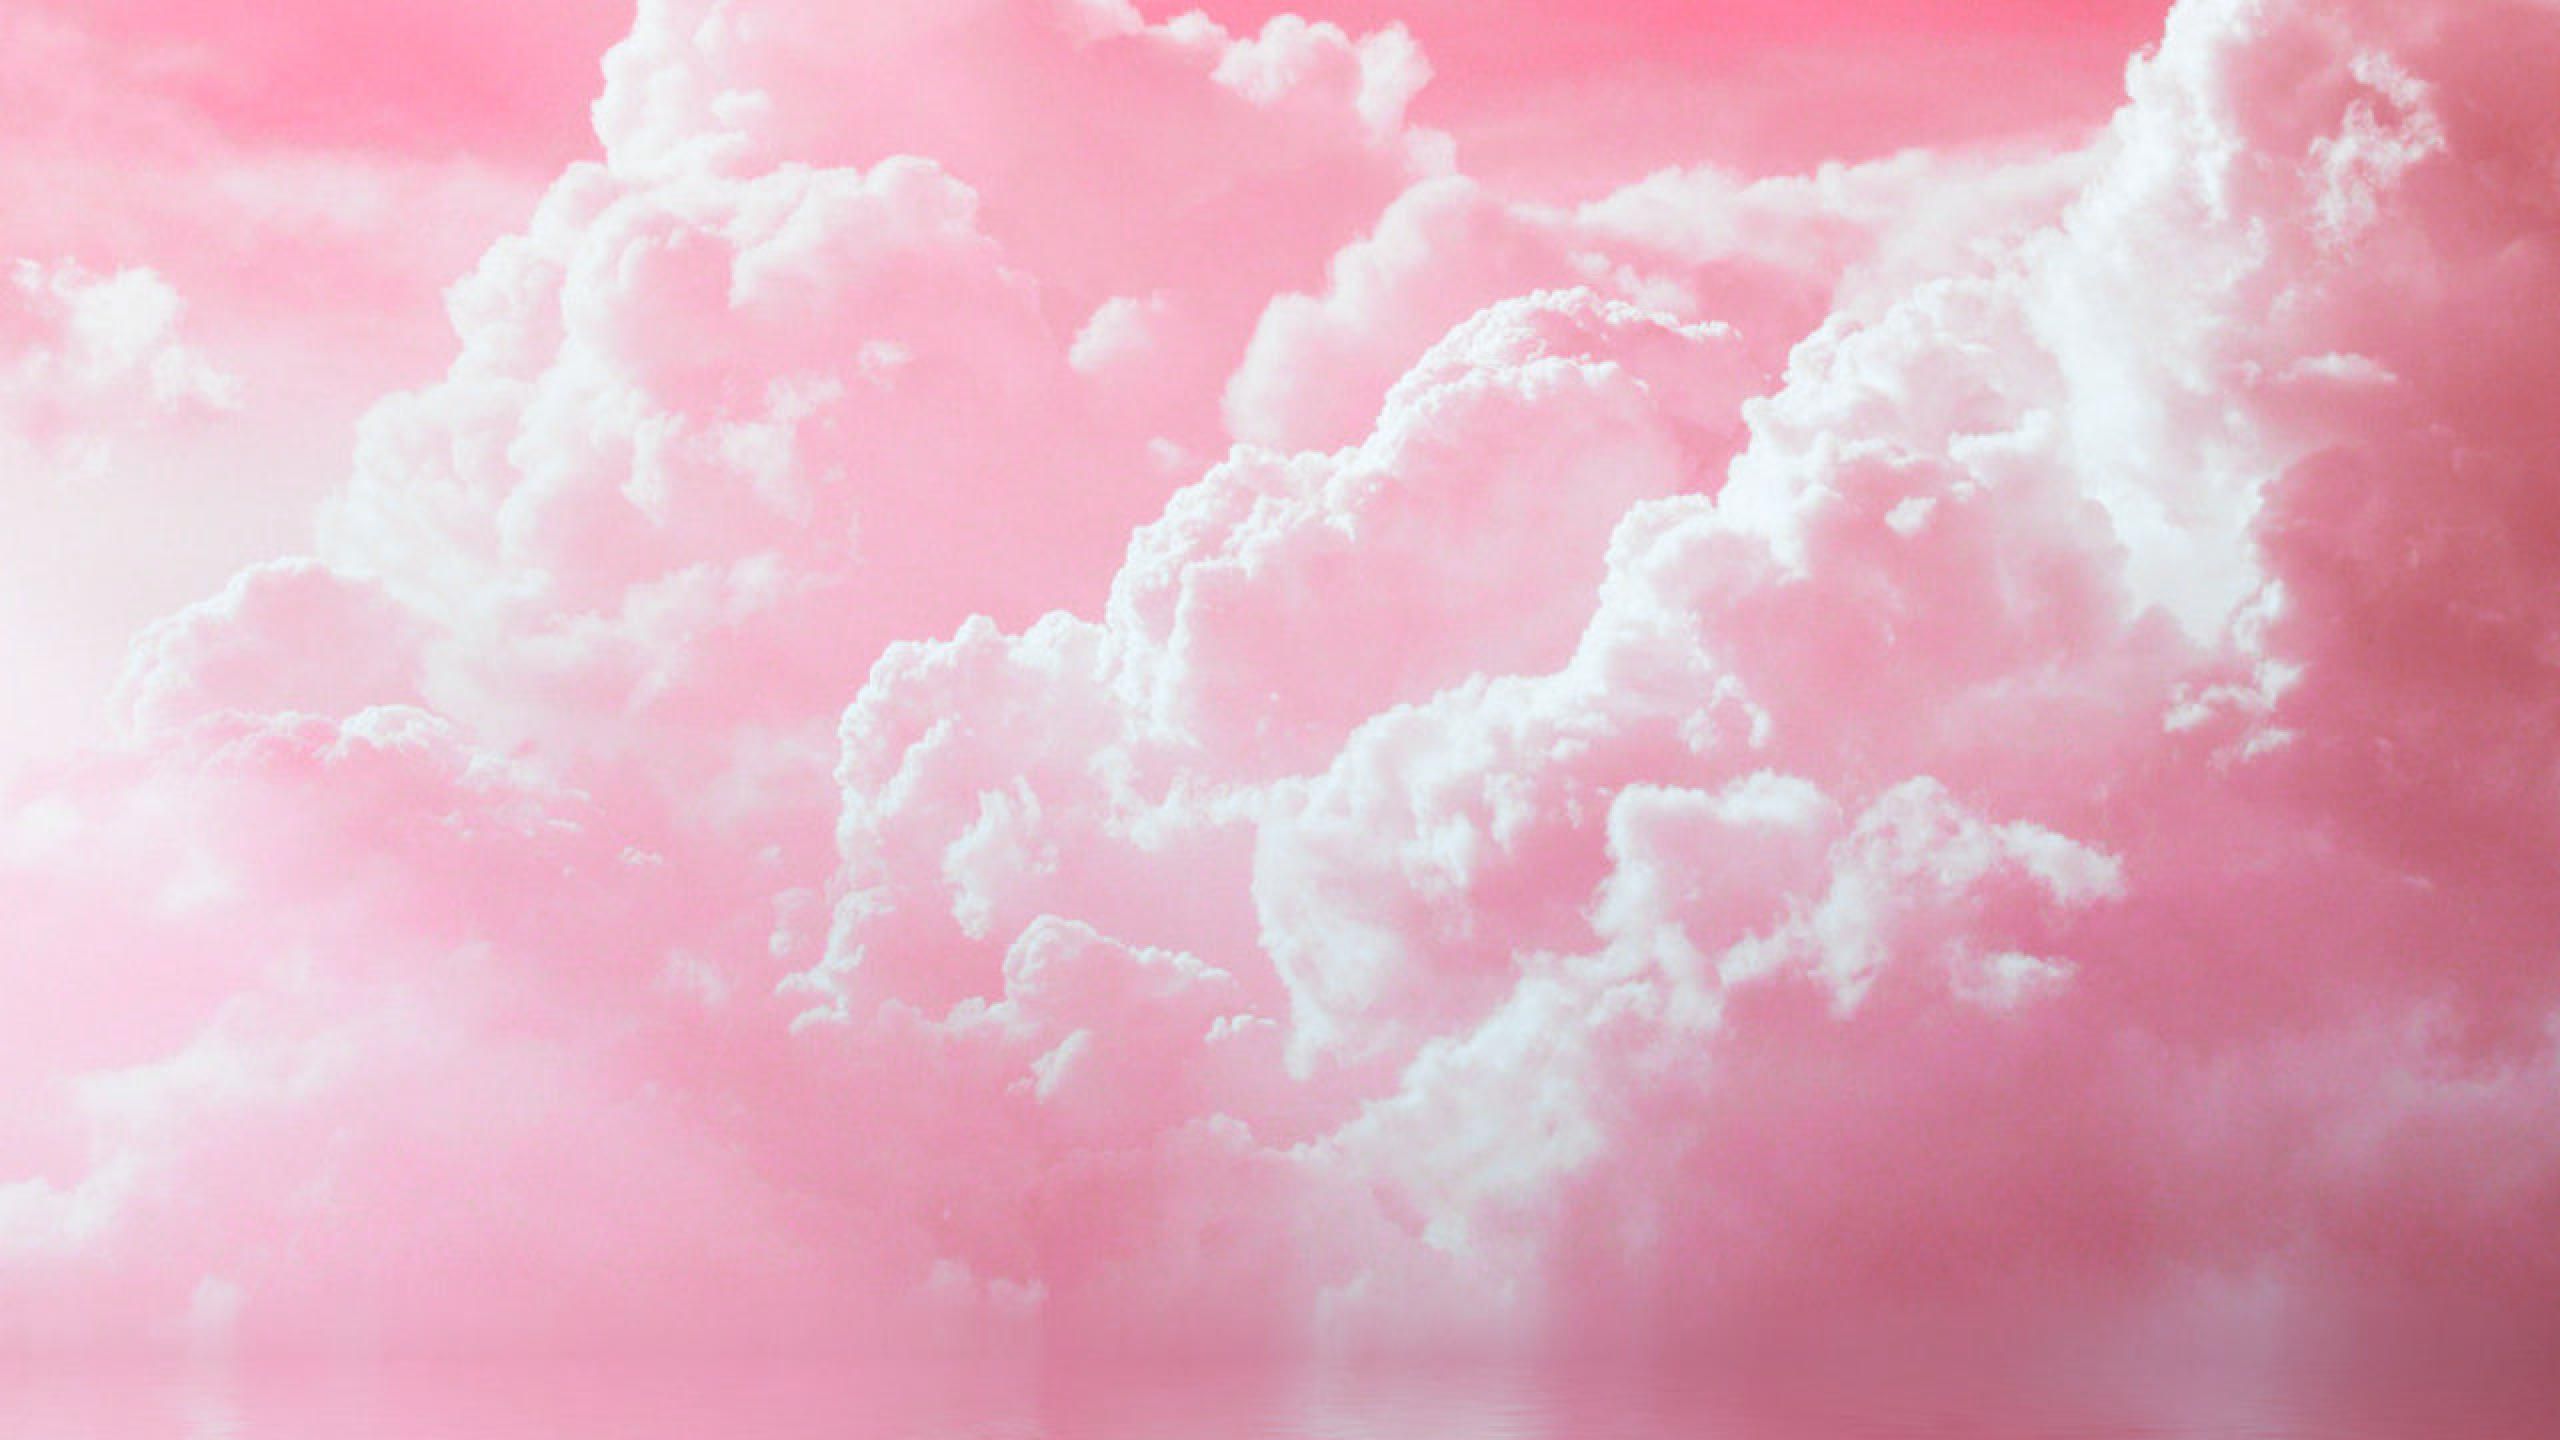 White Clouds on Blue Sky. Wallpaper in 2560x1440 Resolution